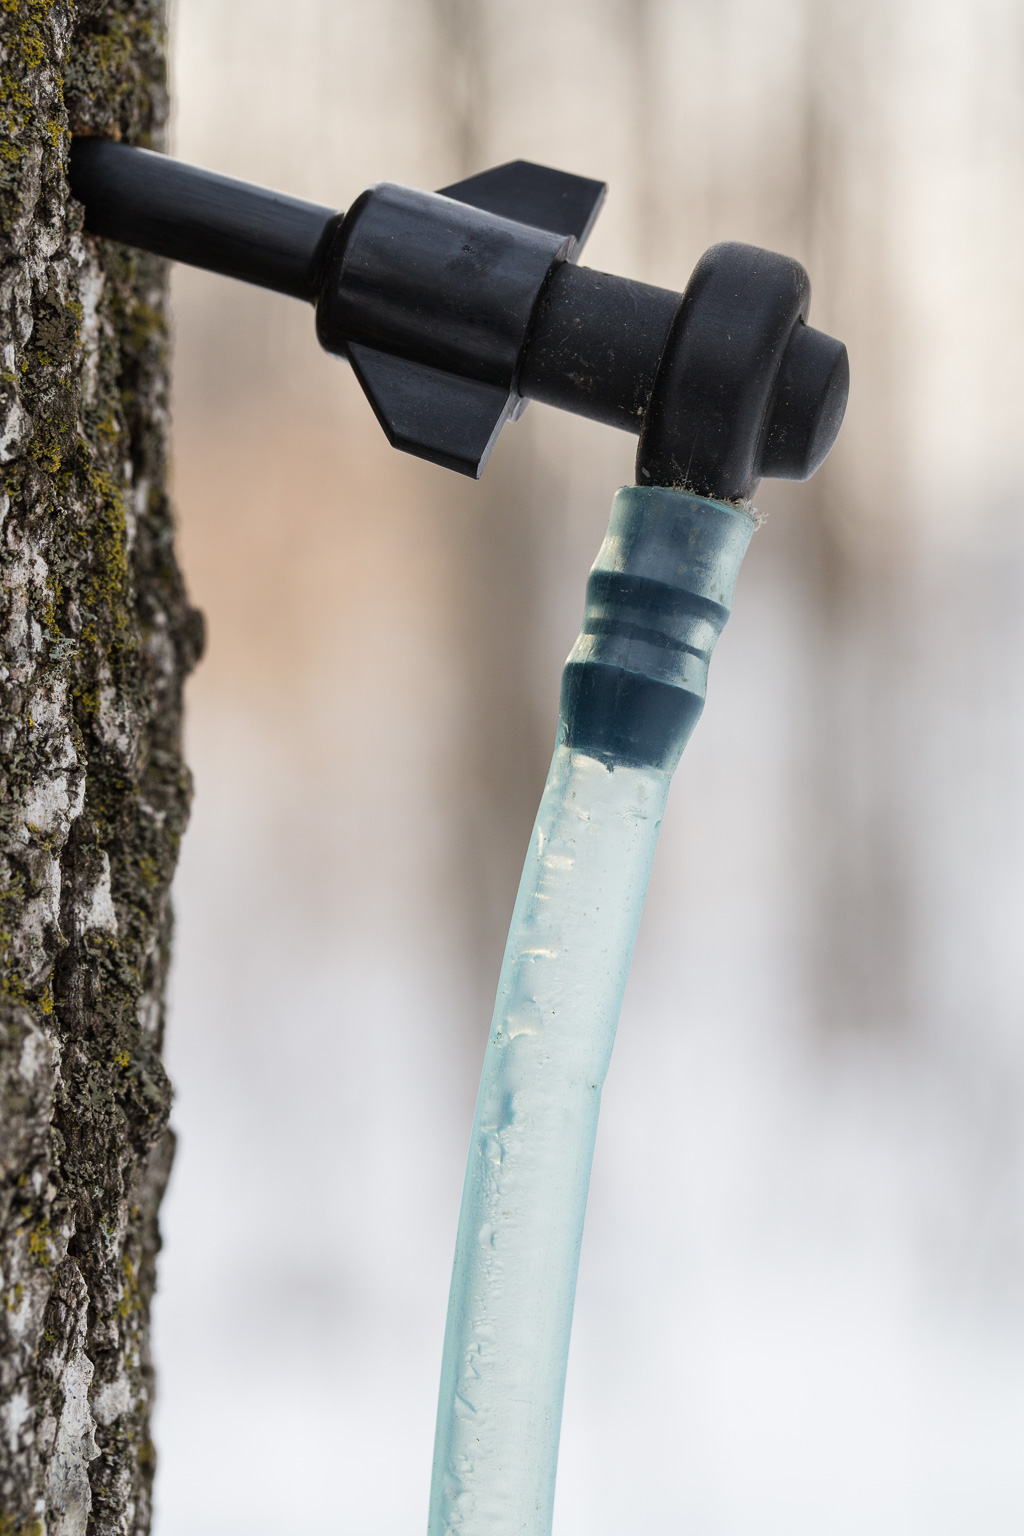 Tapping a maple tree for sap.